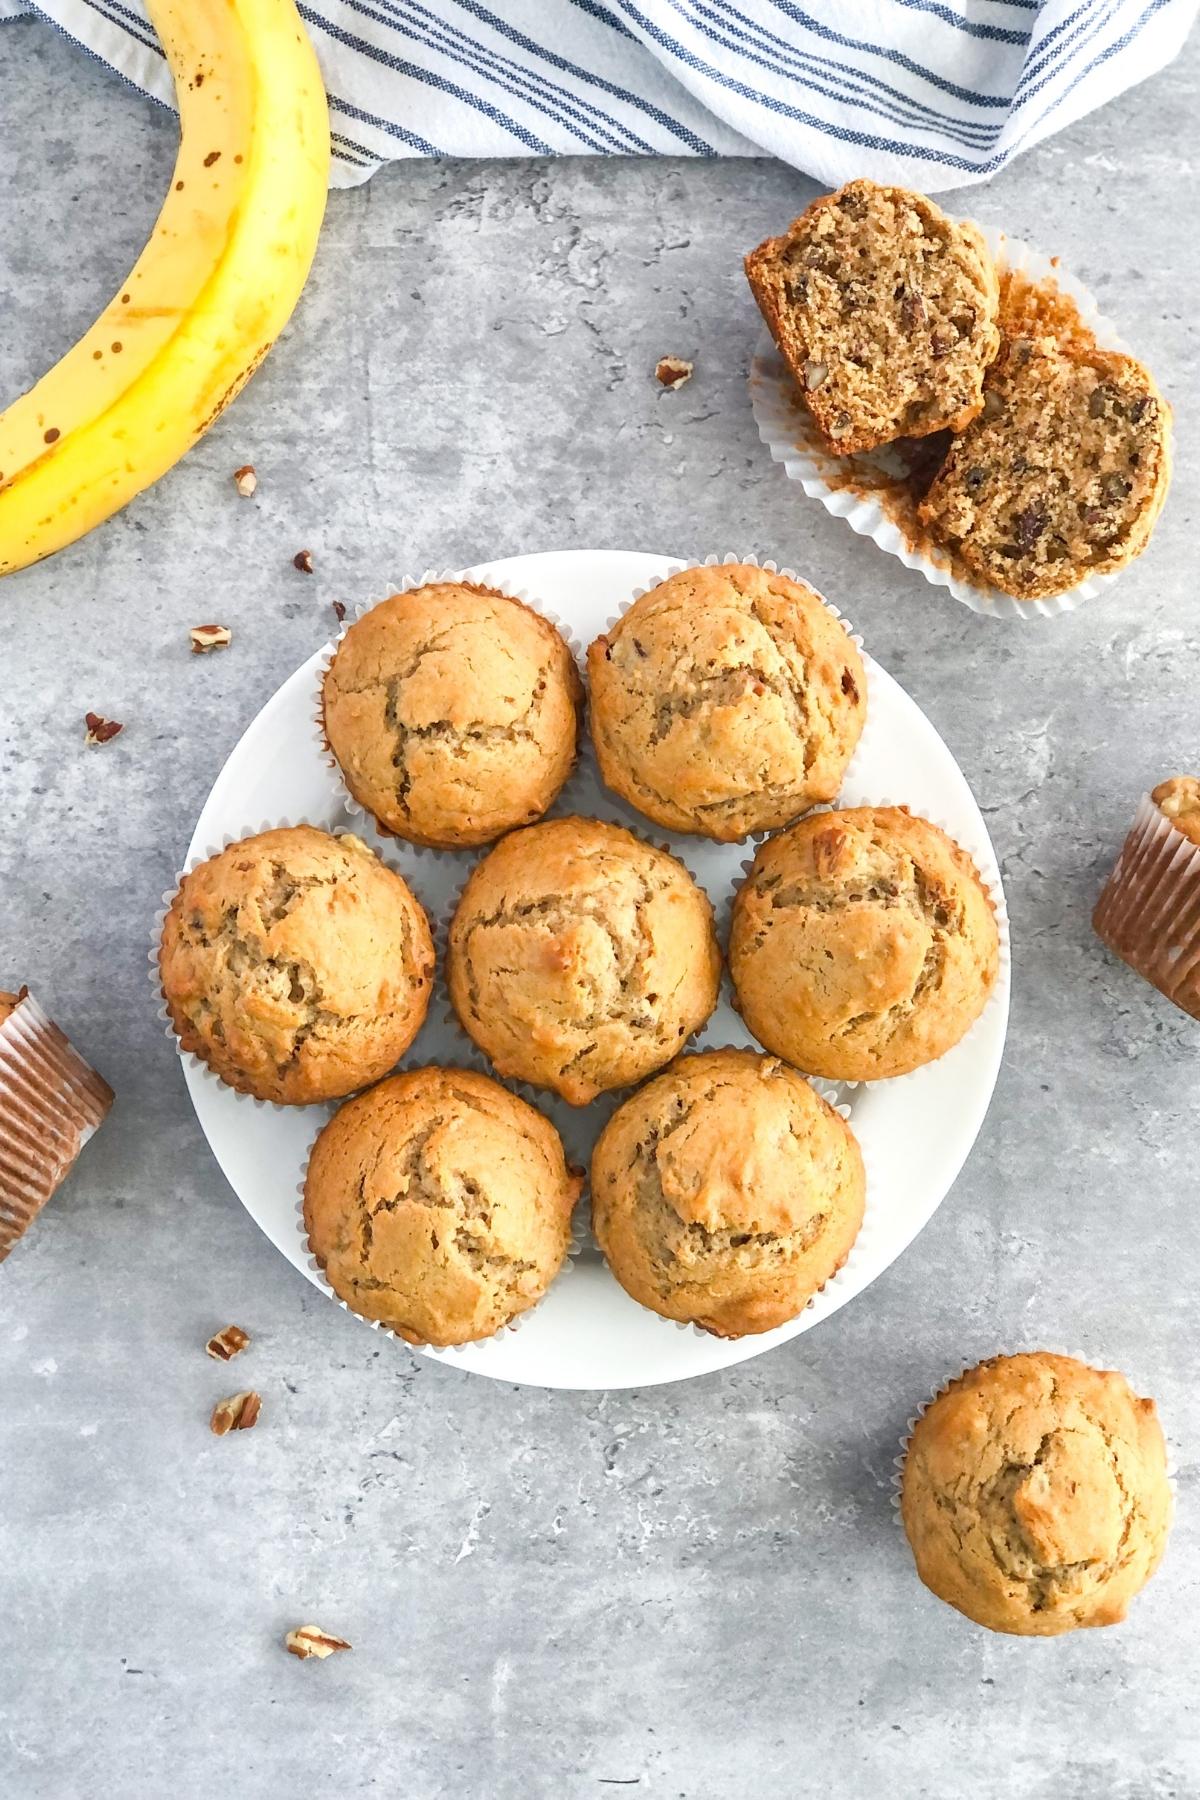 cookie butter and banana pecan muffins on a plate with a striped kitchen towel